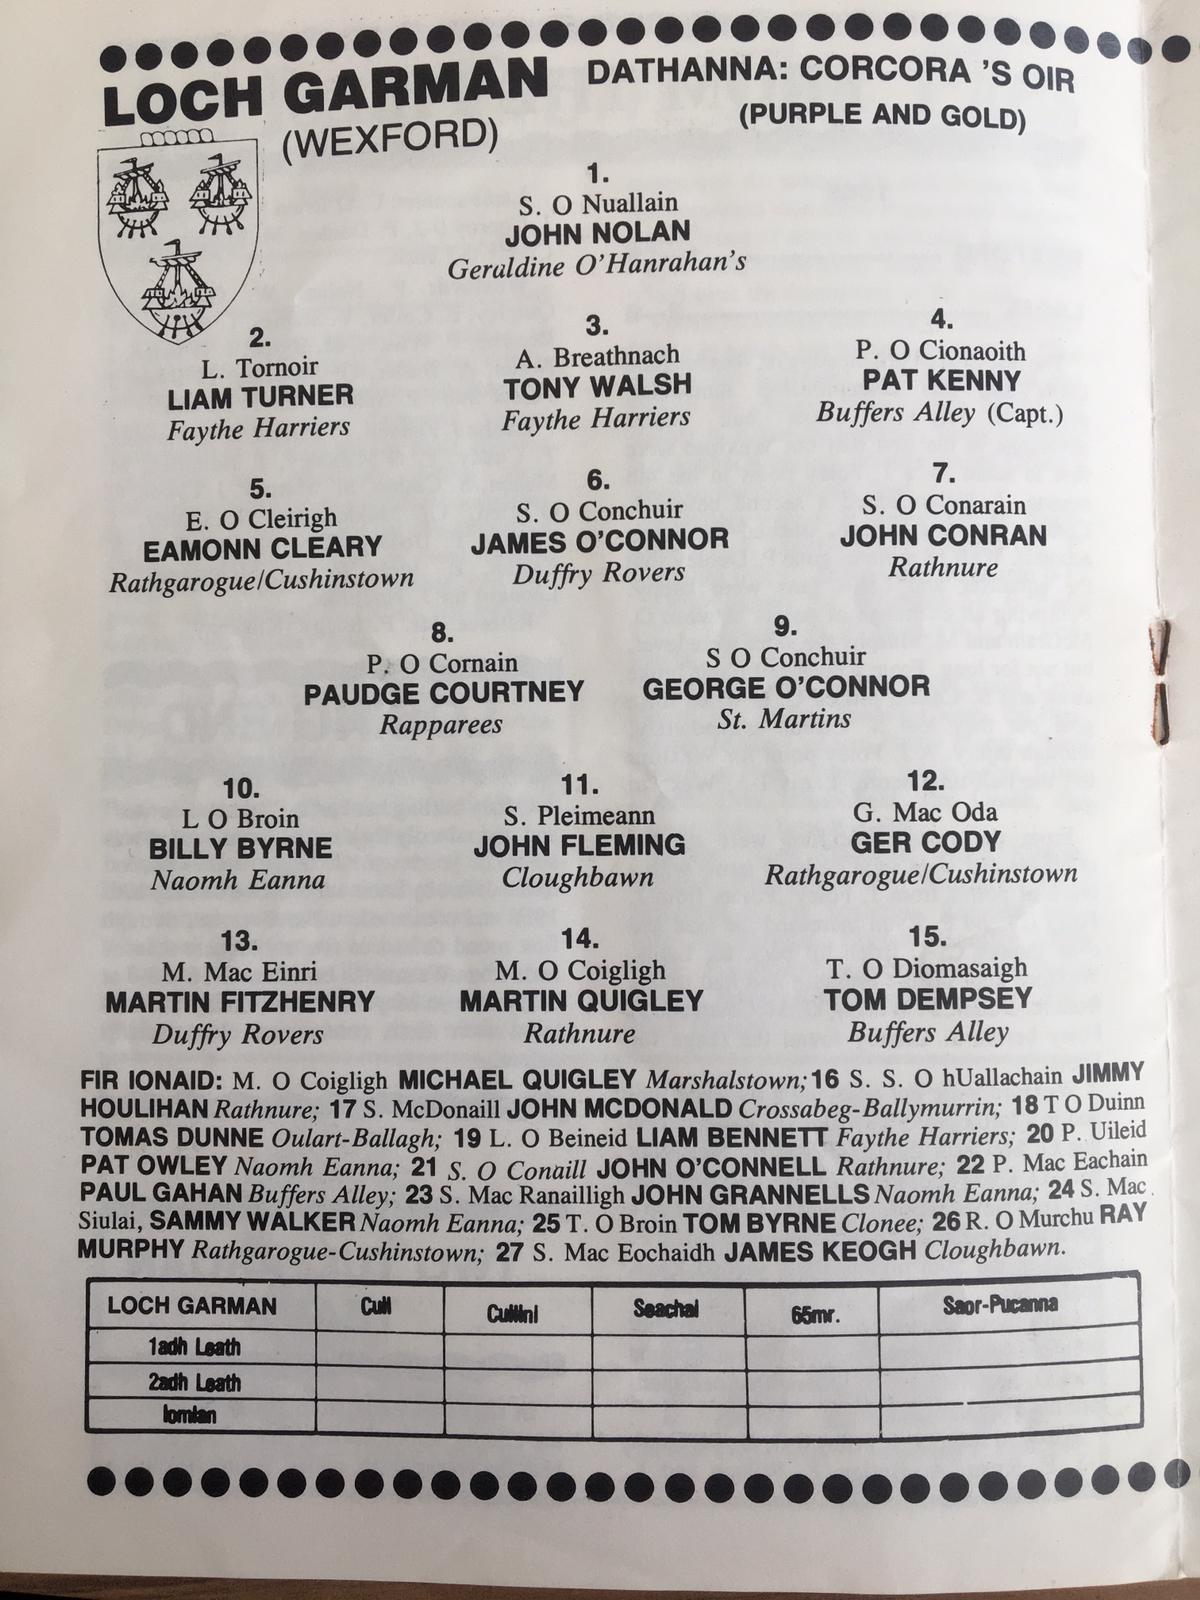 The Laois hurlers last beat Wexford in the championship in 1985